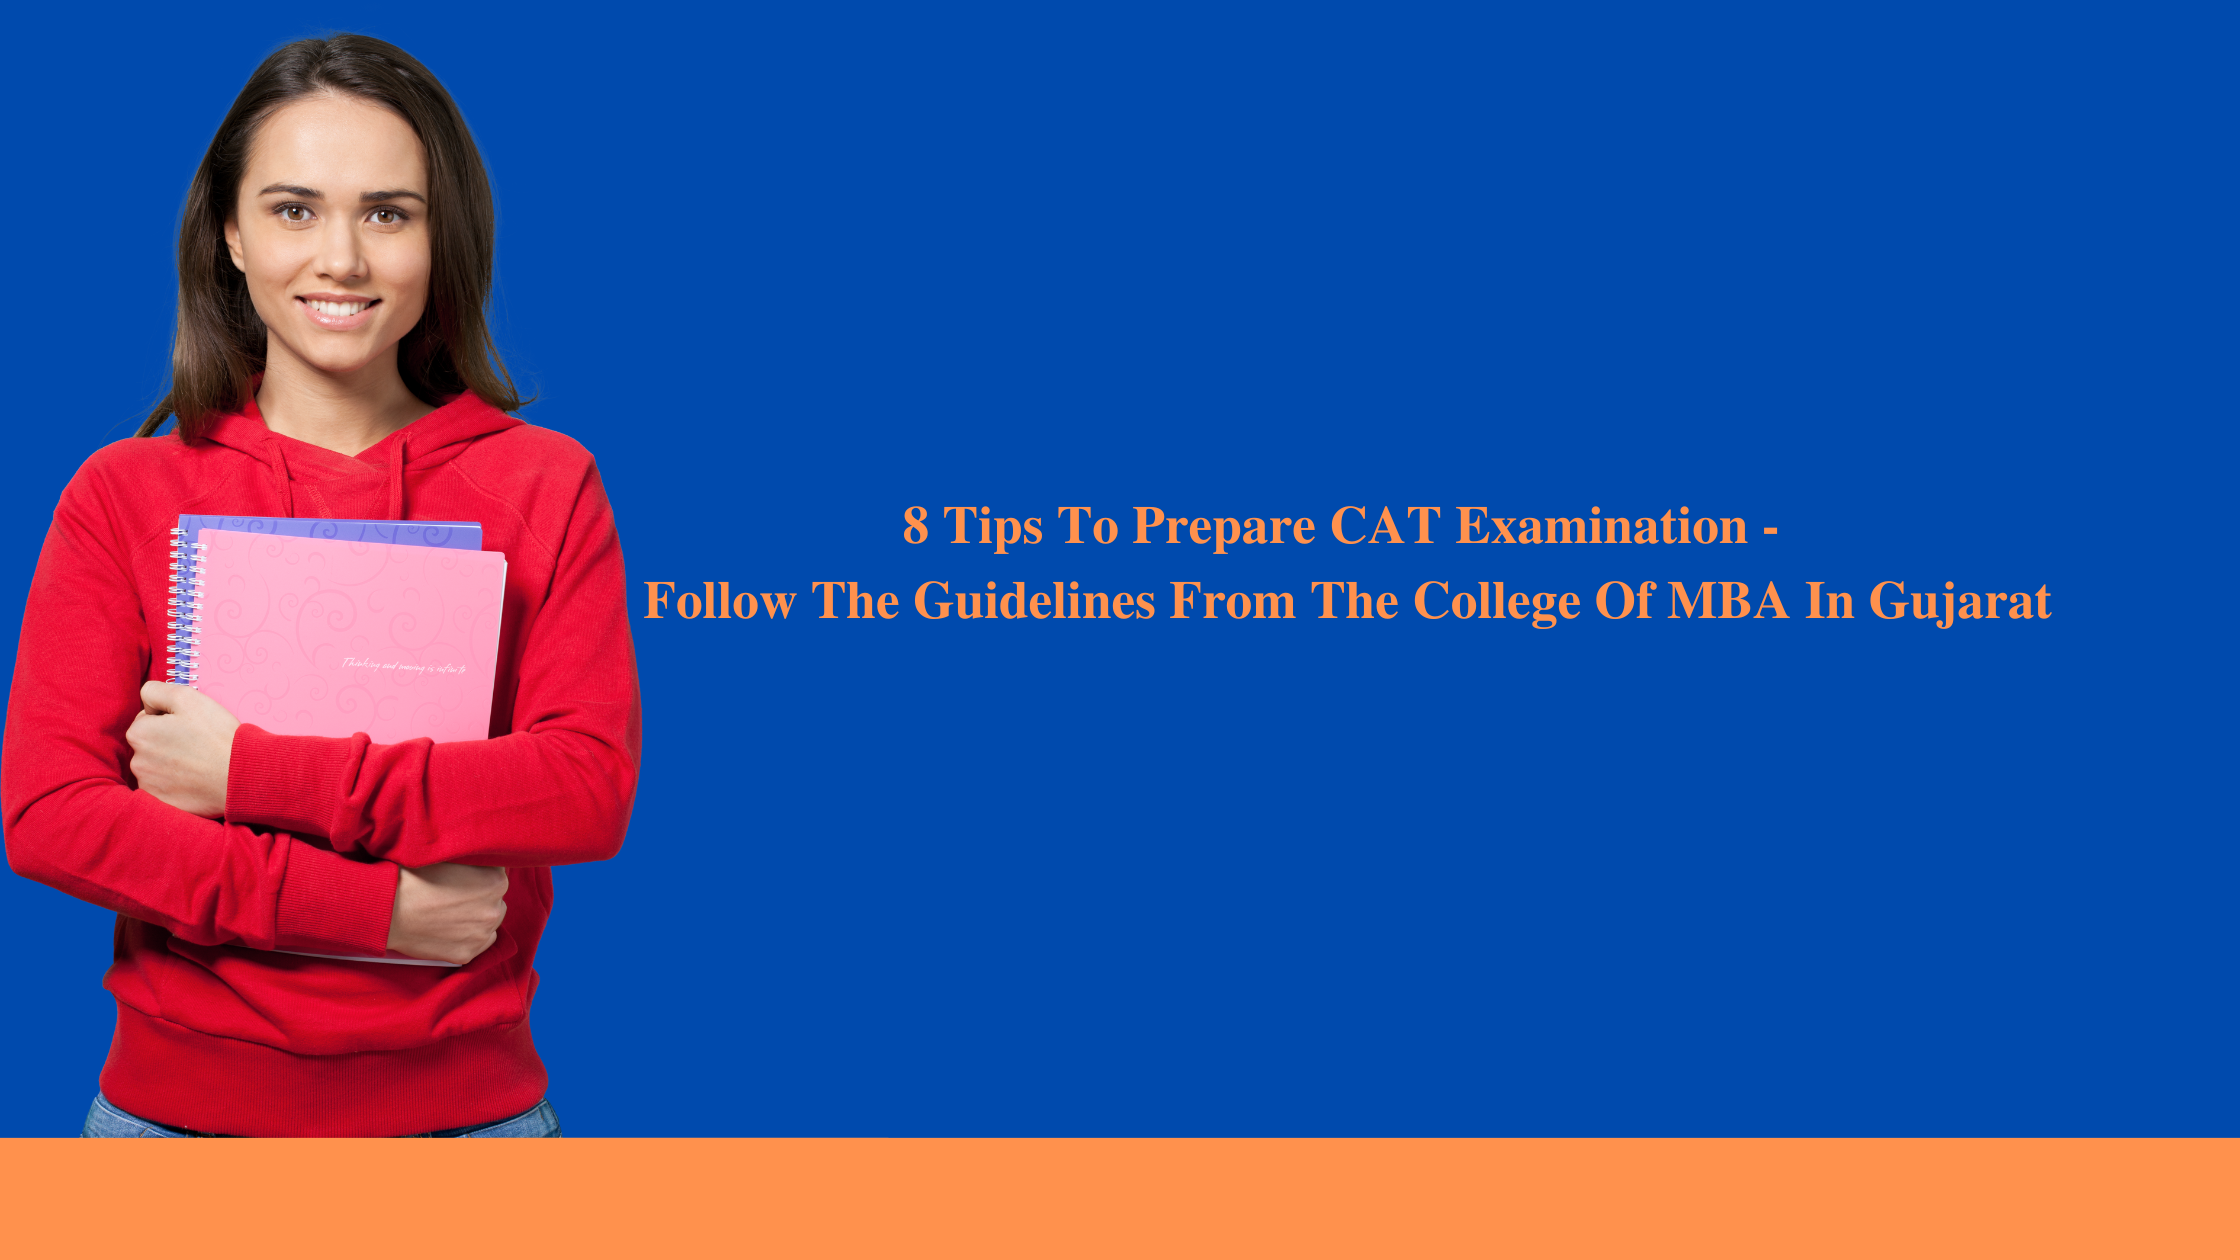 8 Tips To Prepare CAT Examination – Follow The Guidelines From The College Of MBA In Gujarat